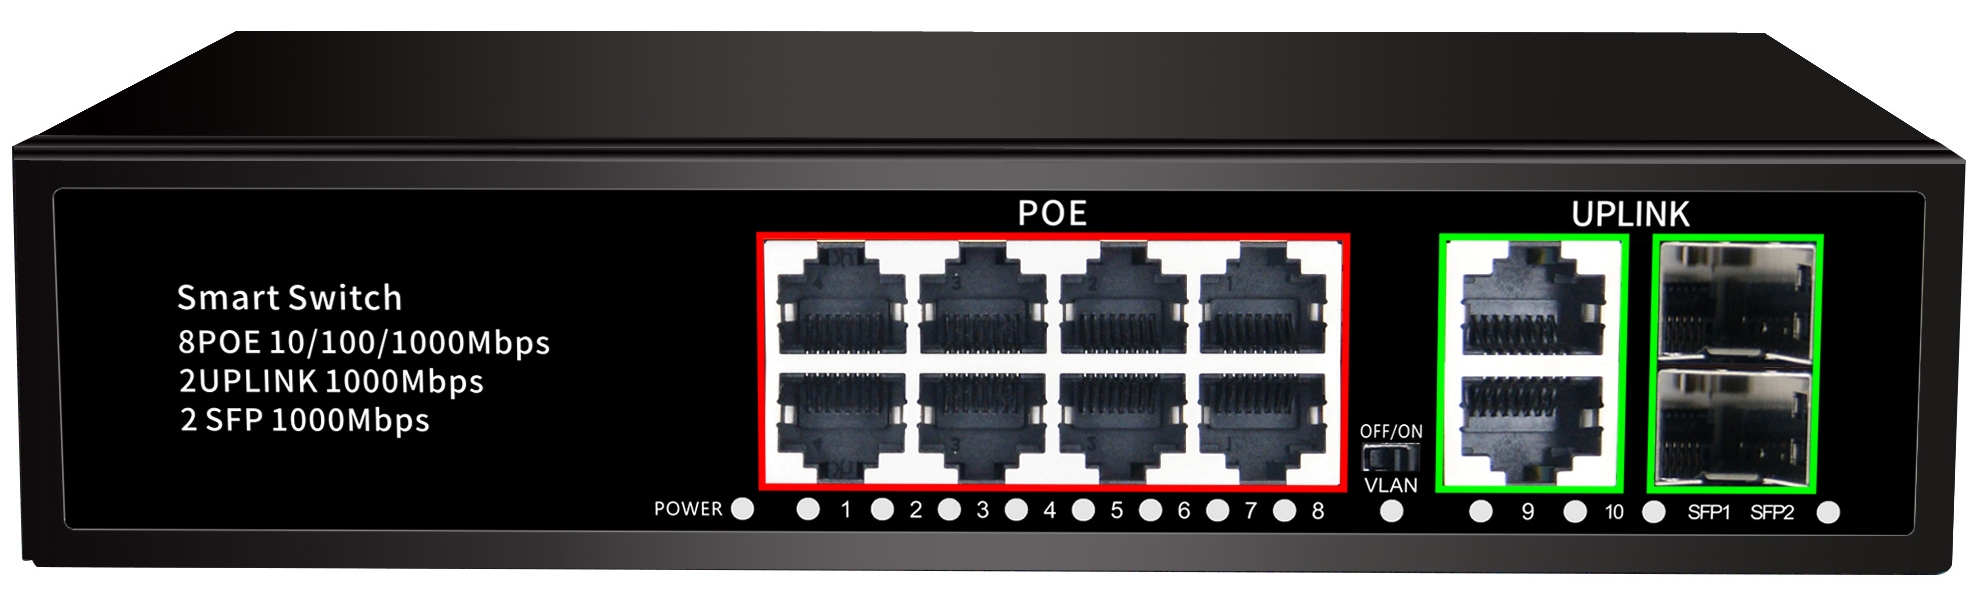 Factory source 4 Ports Industrial Switch -
 8*100/1000mbps POE Port+2*100/1000mbps UP Link Port+1*100/1000mbps SFP Port, Smart PoE Switch JHA-P42208BMH – JHA